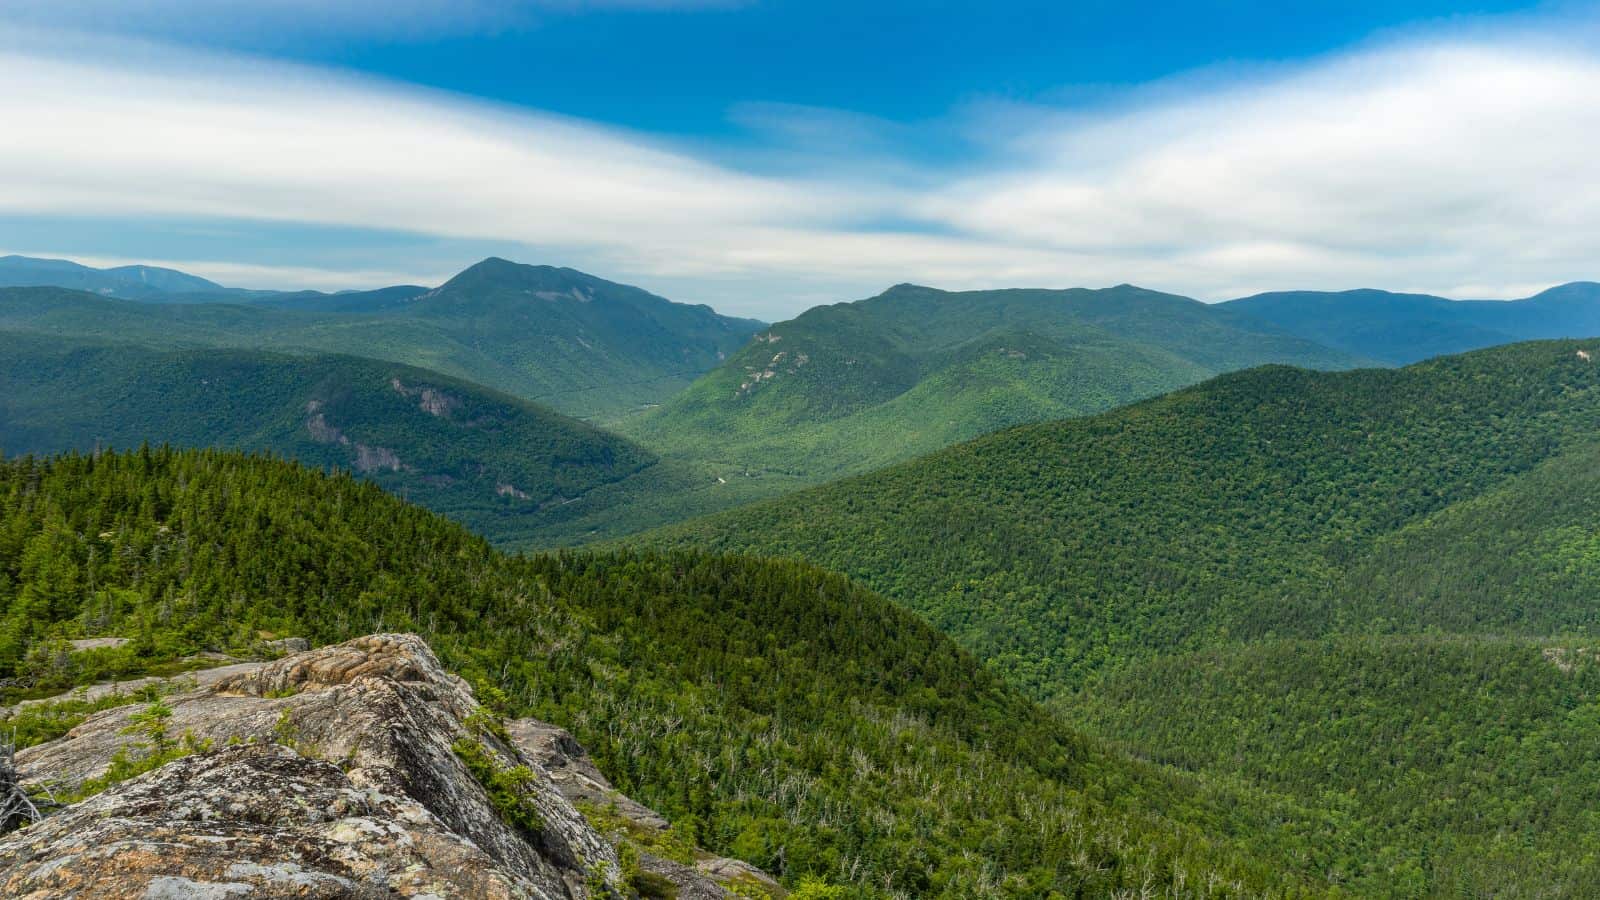 <p>North Conway isn’t the most enchanting small town on this list, but it is one of the best for exploring the White Mountains, a breathtaking mountain range in New Hampshire.</p><p>In the summer, hike through the White Mountains, go swimming at a hole along the Saco River, rock climb at Cathedral and Whitehorse Ledges, or hunt for antiques in town. Bargain shoppers will love that North Conway boasts over 100 outlet stores at Settlers Green.</p>